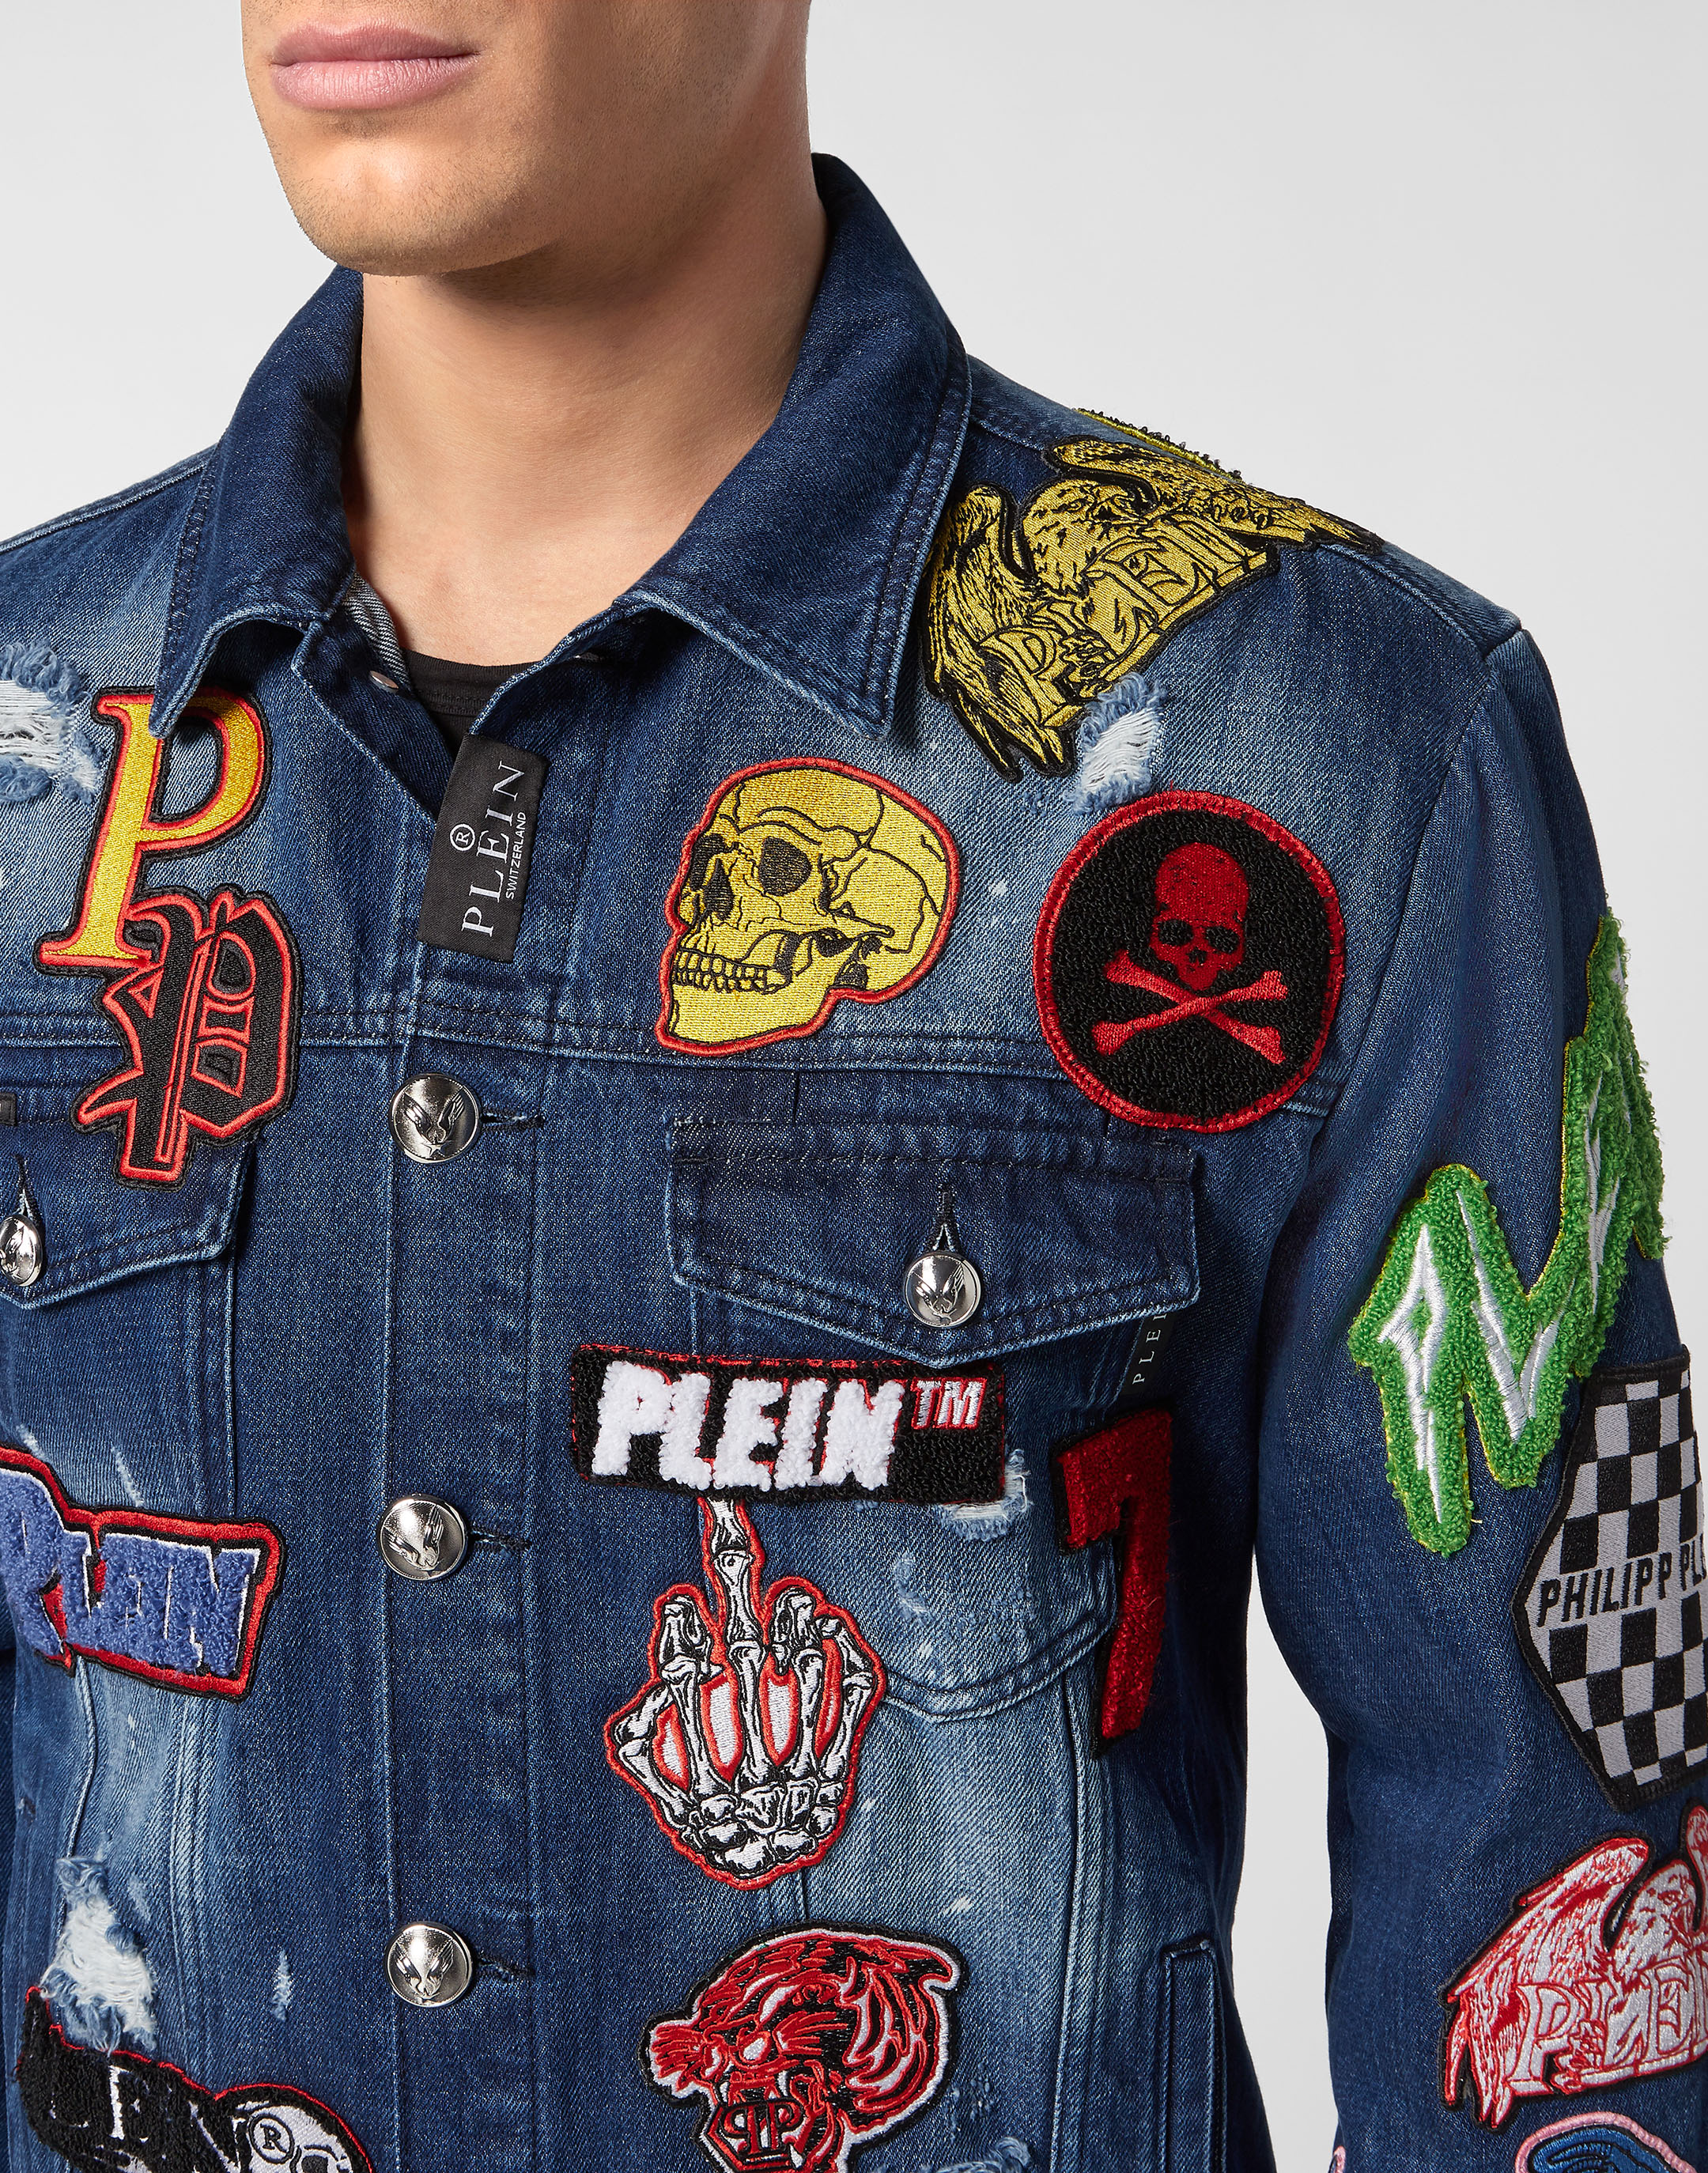 Fun DIY Project - How to Apply Iron-On Patches to a Denim Jacket-lmd.edu.vn